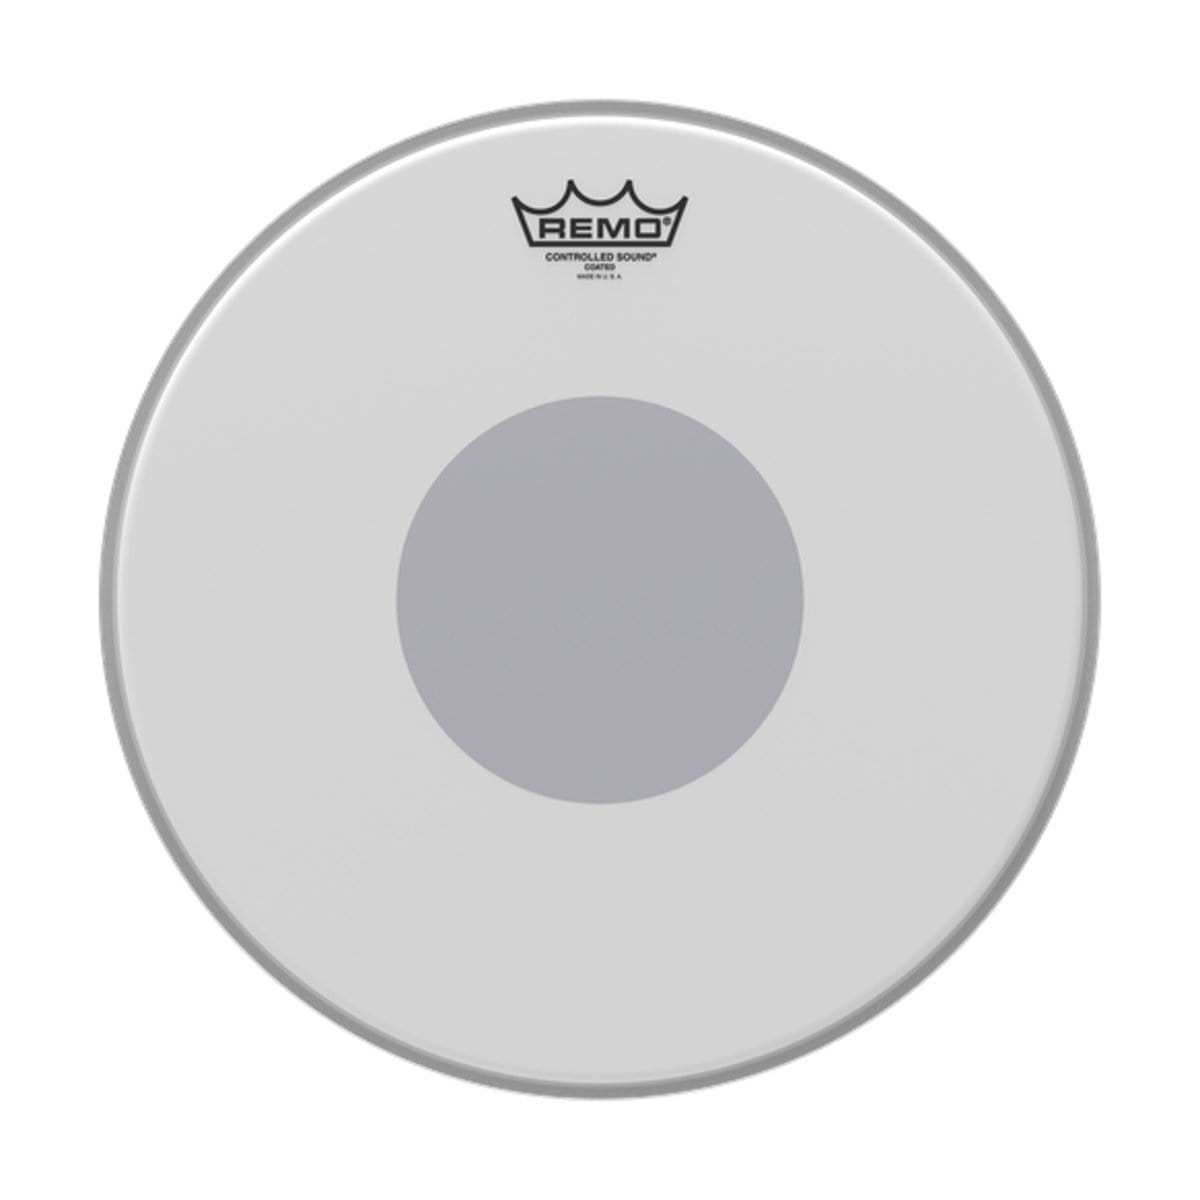 Remo Percussion Remo 14 Inch Drum Head Controlled Sound Coated Black Dot CS-0114-10 - Byron Music